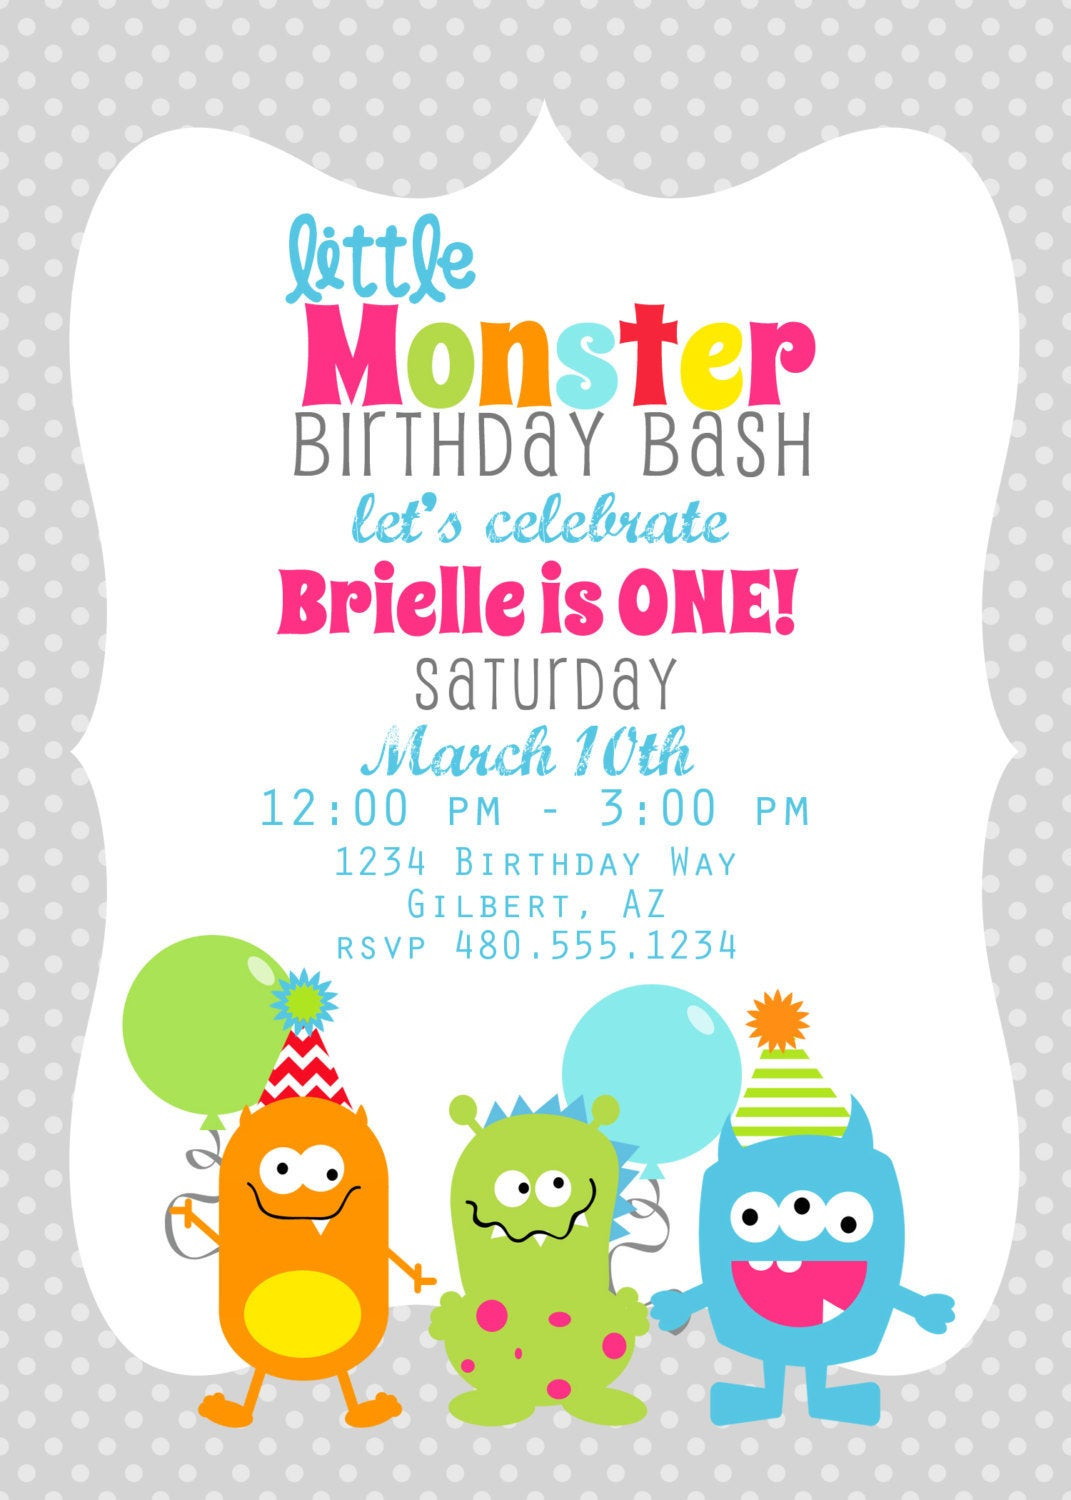 Monster Birthday Party Invitations
 PRINTABLE PARTY INVITATION Little Monster Birthday or Baby